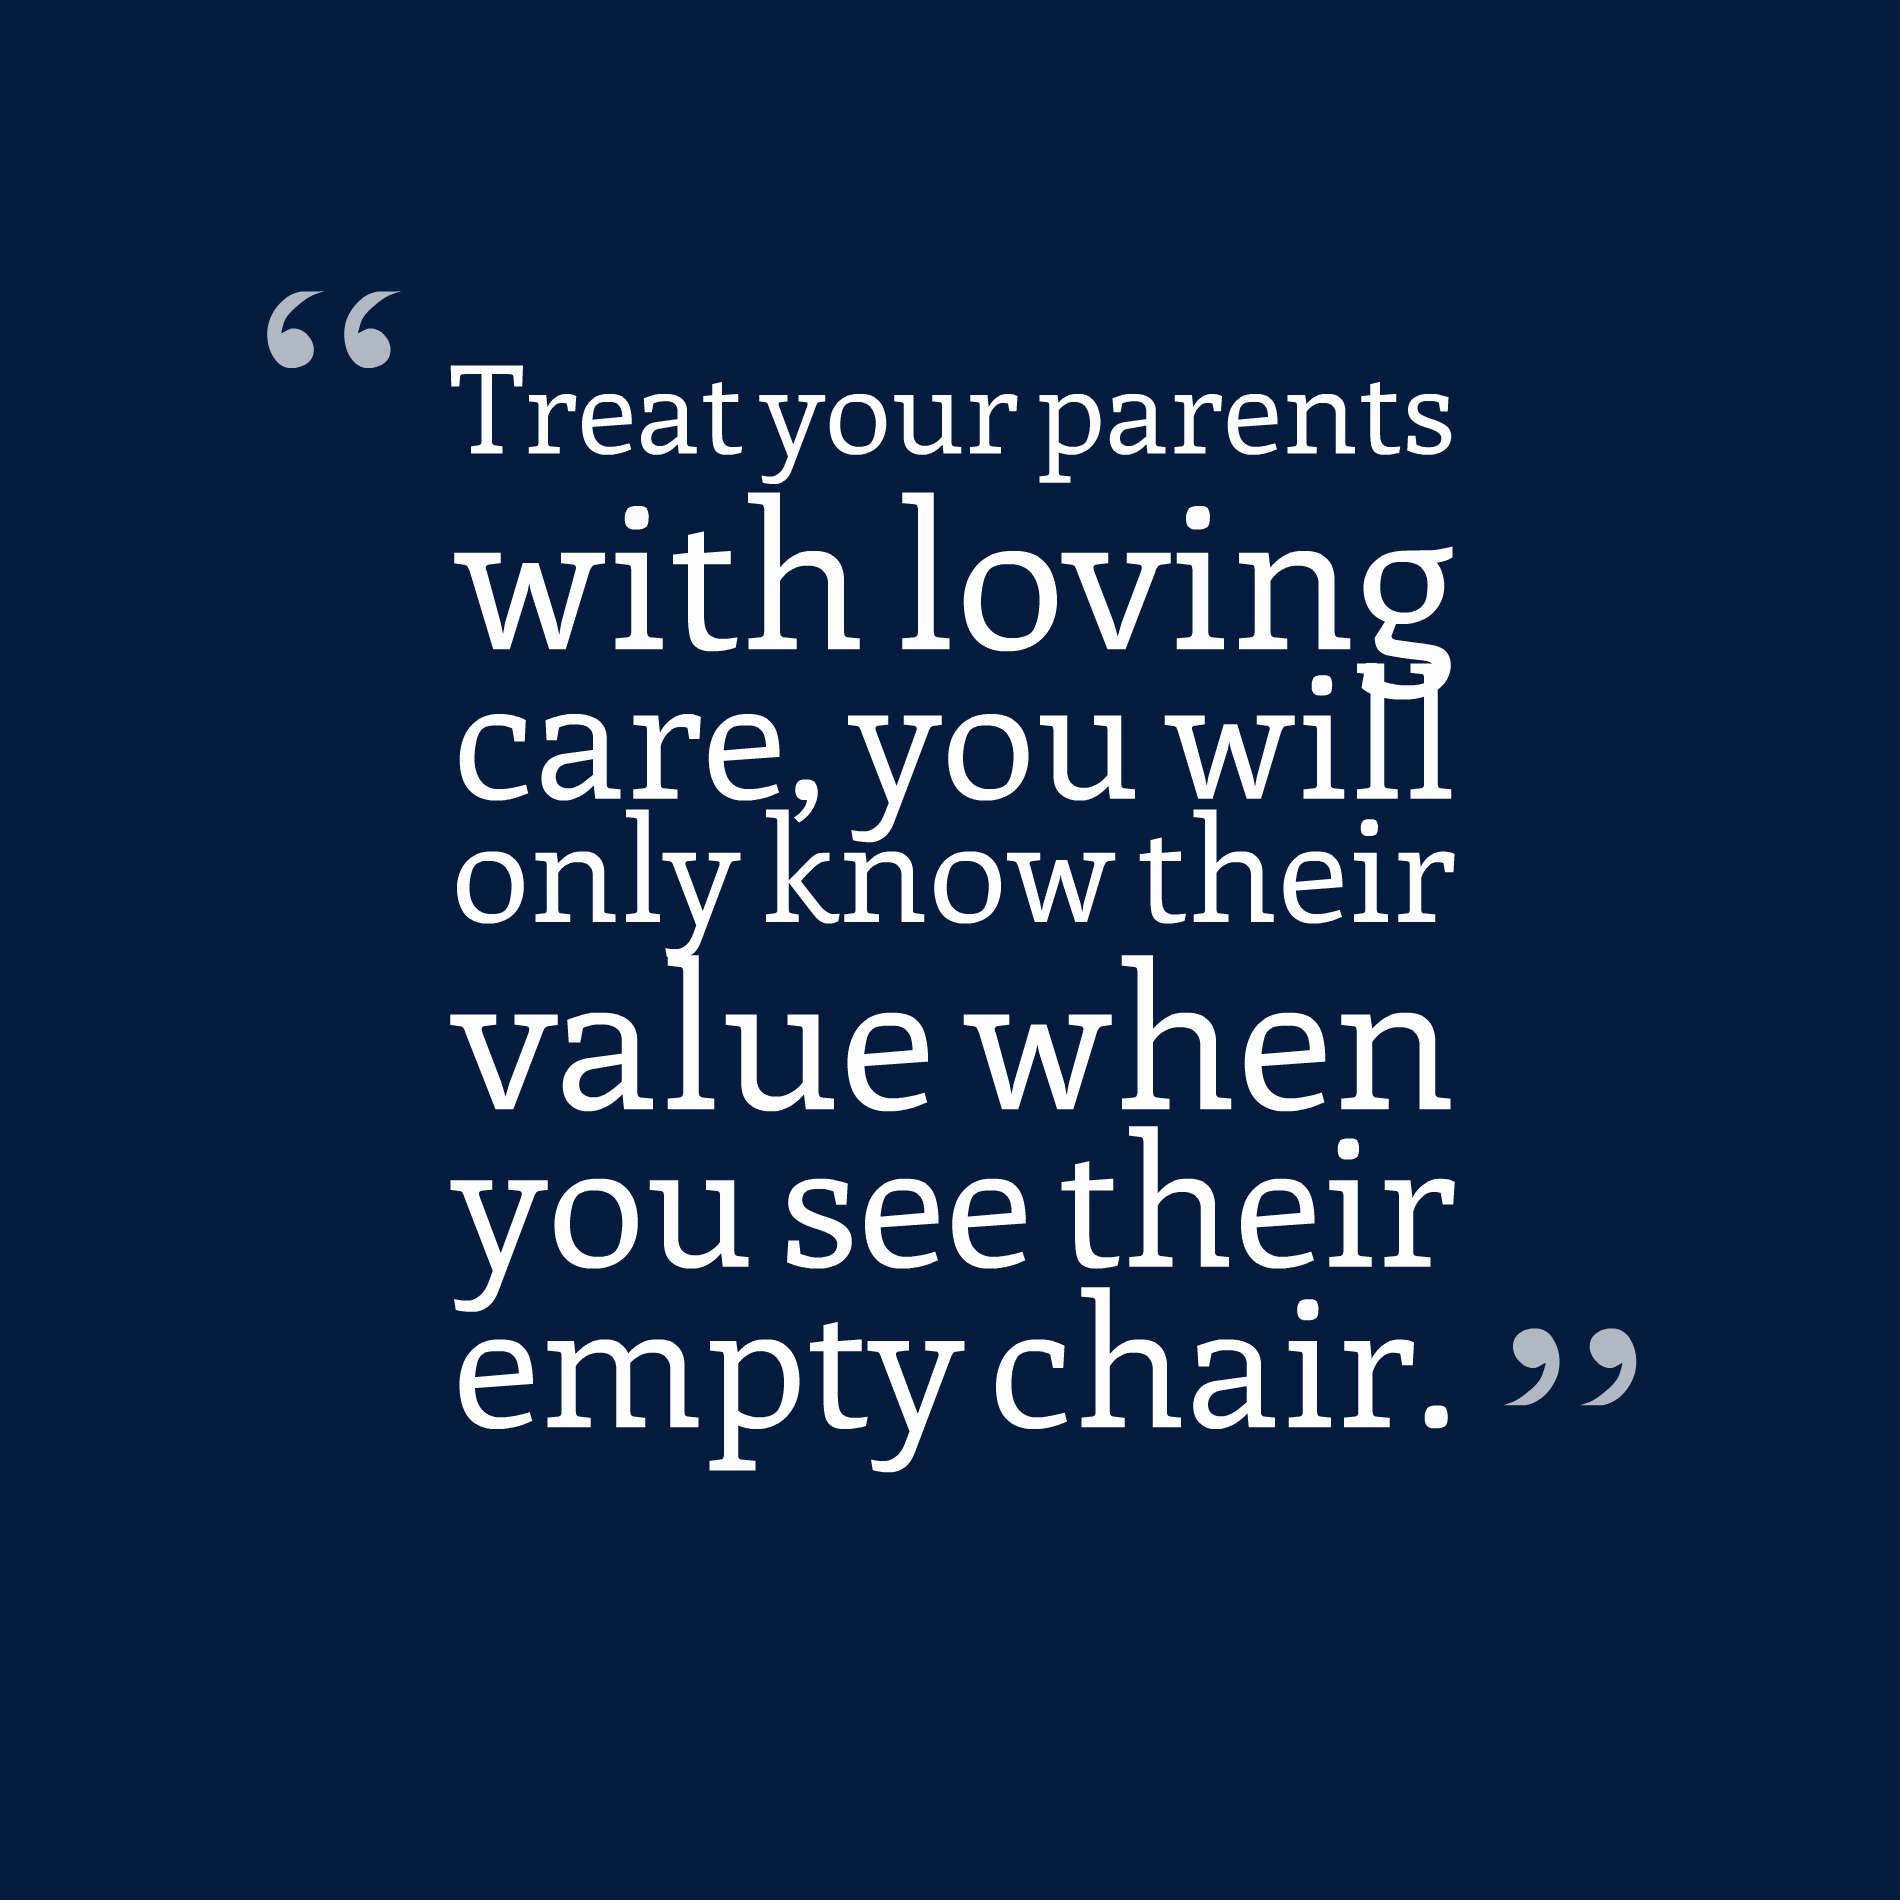 Treat your parents with loving care, you will only know their value when you see their empty chair.